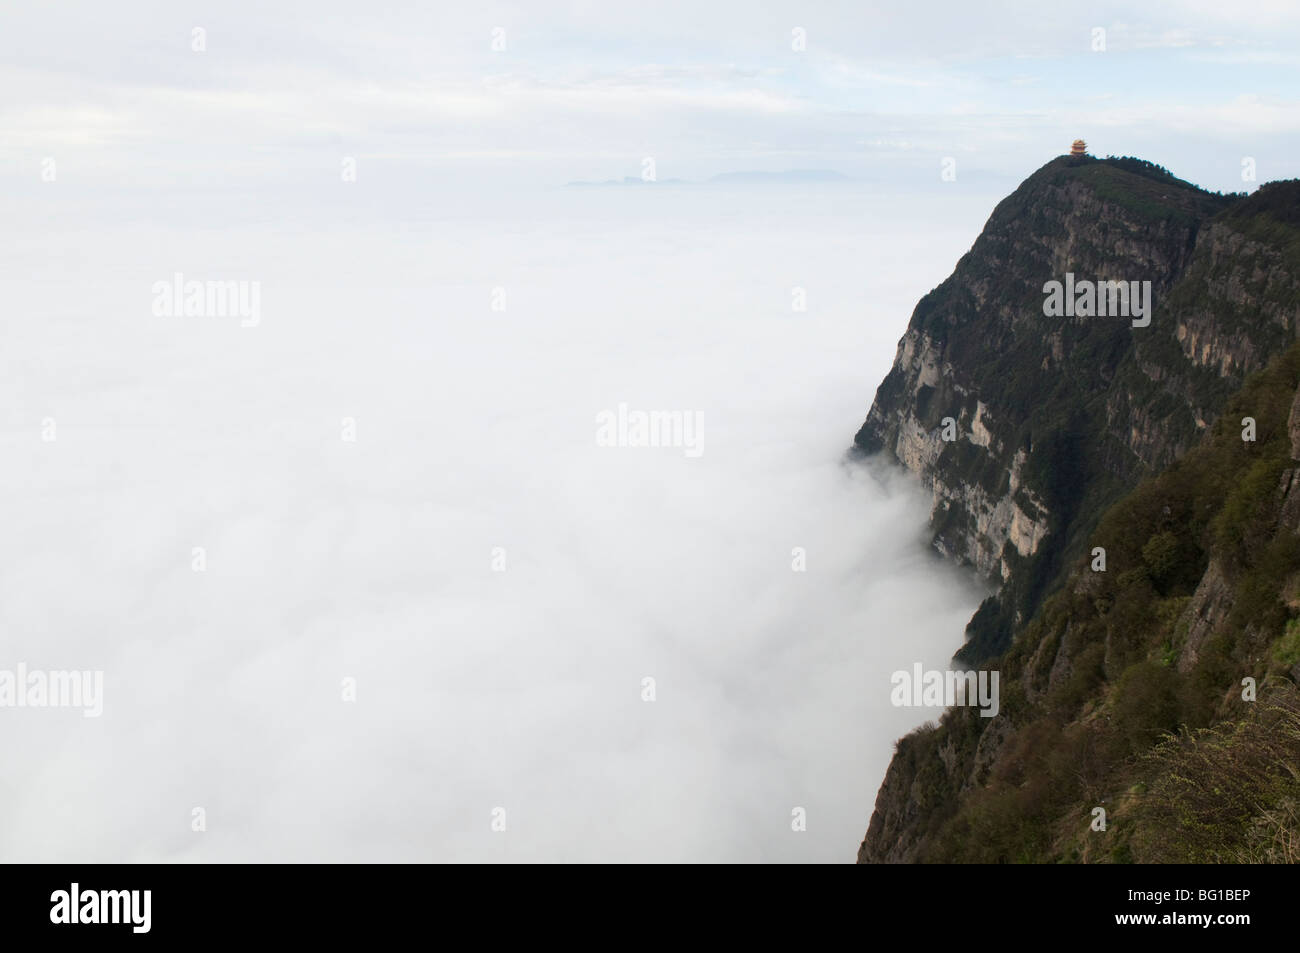 Sea of clouds and Golden Summit temple at Mount Emei Shan, Mount Emei Scenic Area, UNESCO, Sichuan Province, China Stock Photo